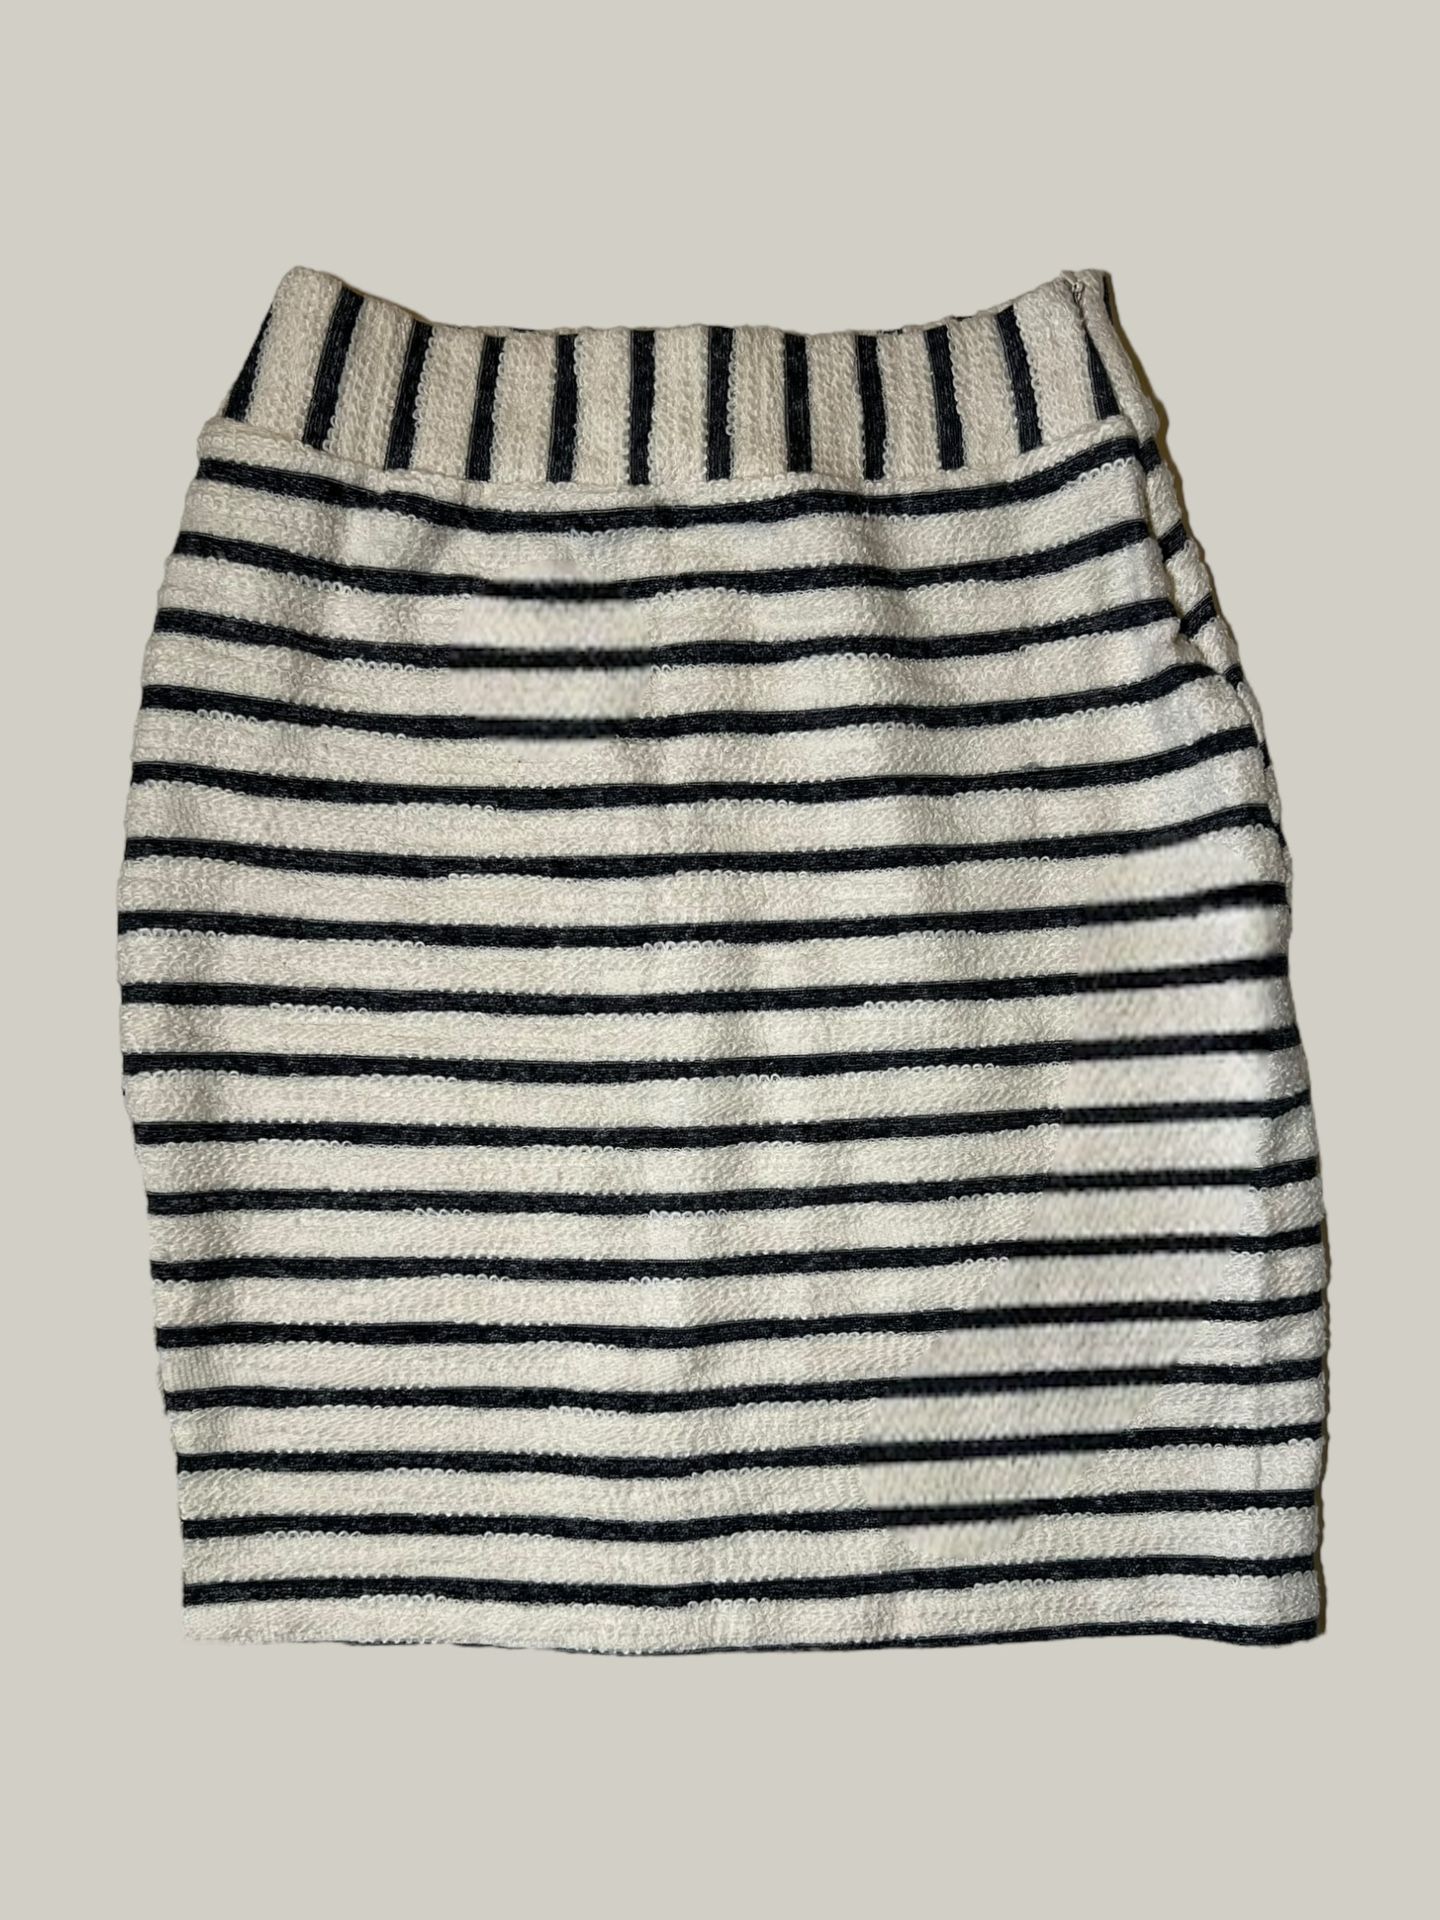 JOA Lines of Duty Cream Striped Pencil Skirt. 100% Cotton. Size M